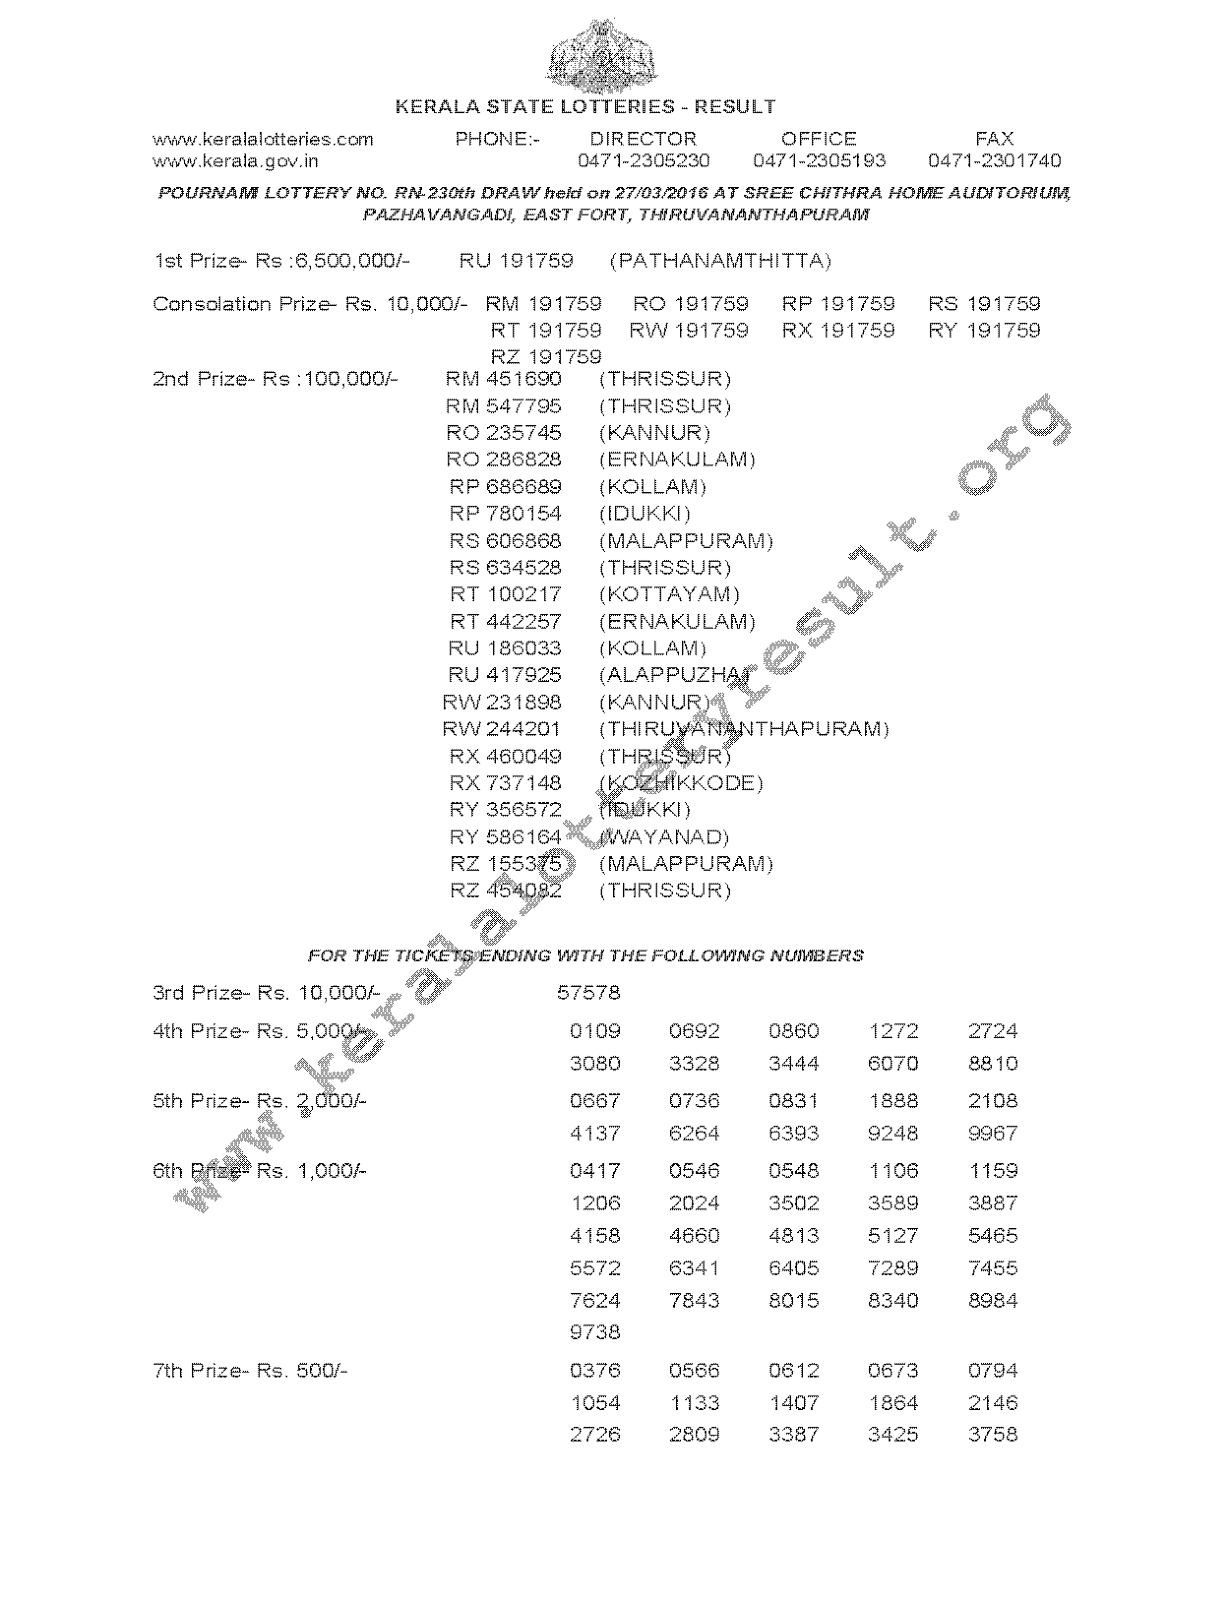 POURNAMI Lottery RN 230 Result 27-3-2016